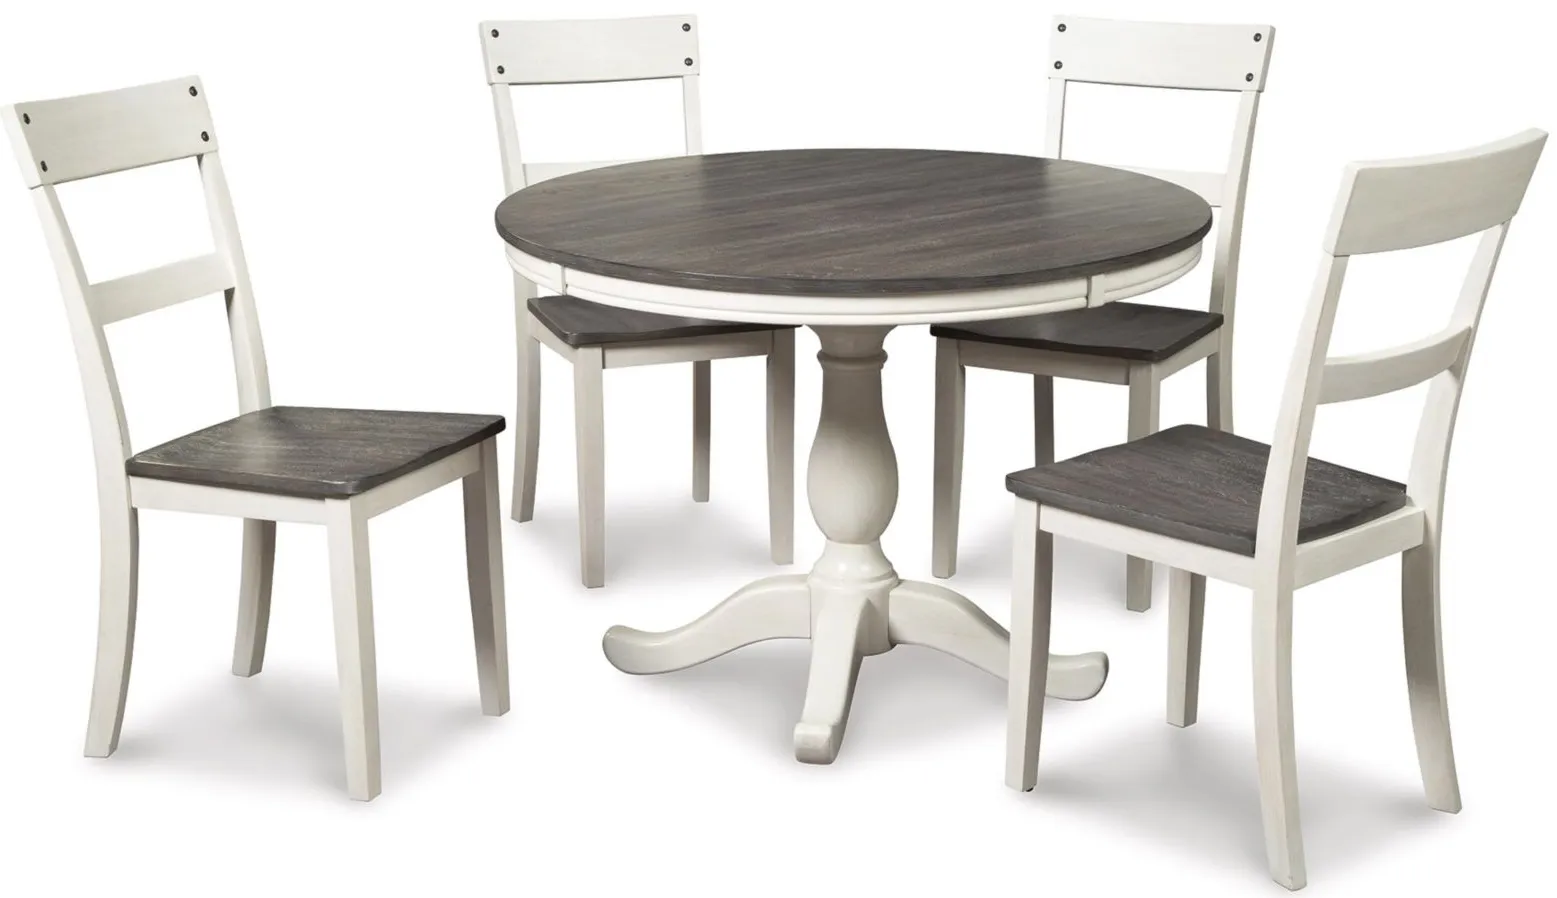 Nelling 5-pc. Dining Set in Two-tone by Ashley Furniture